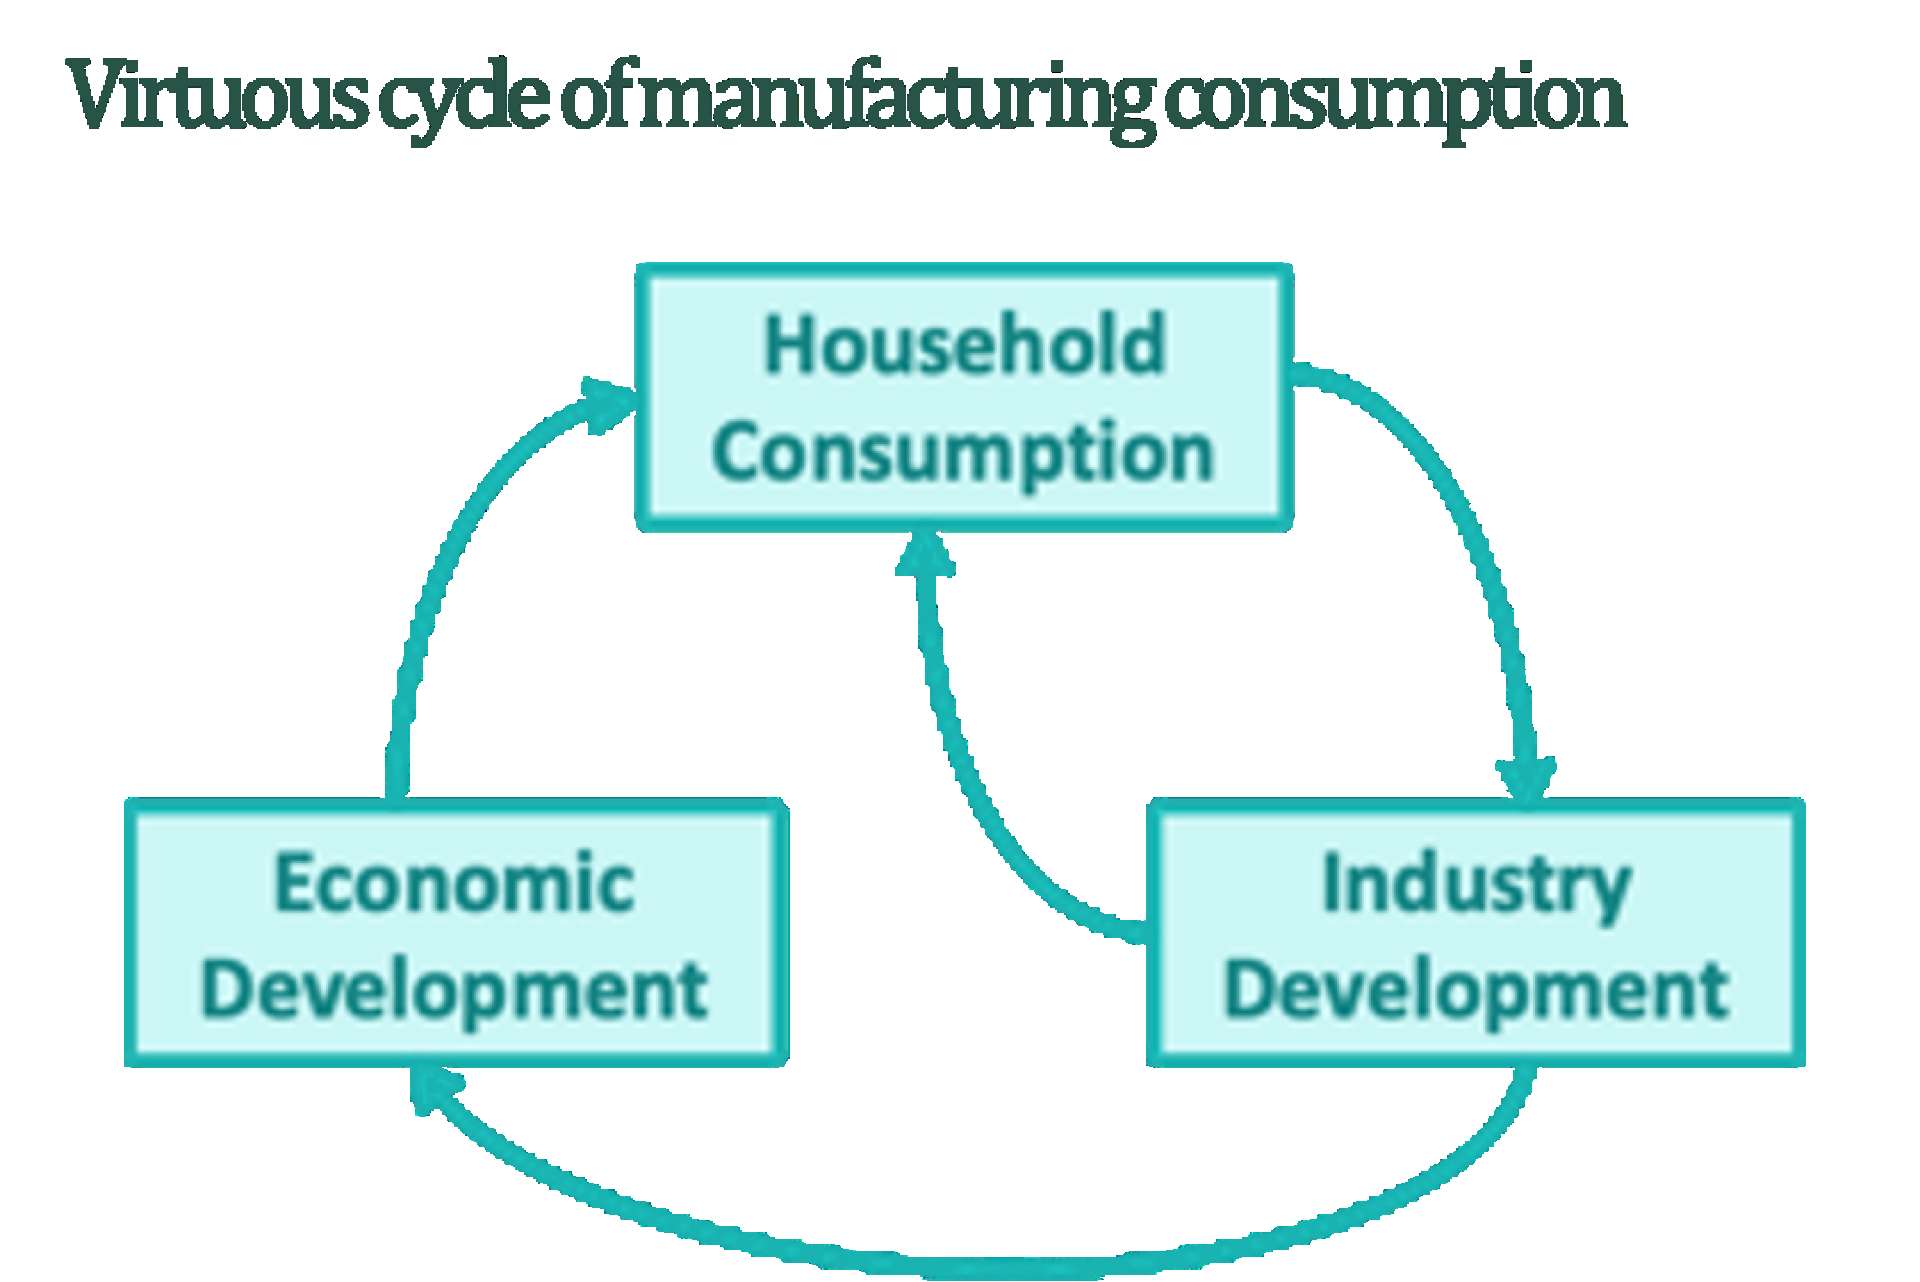 Virtuous cycle of manufacturing consumption